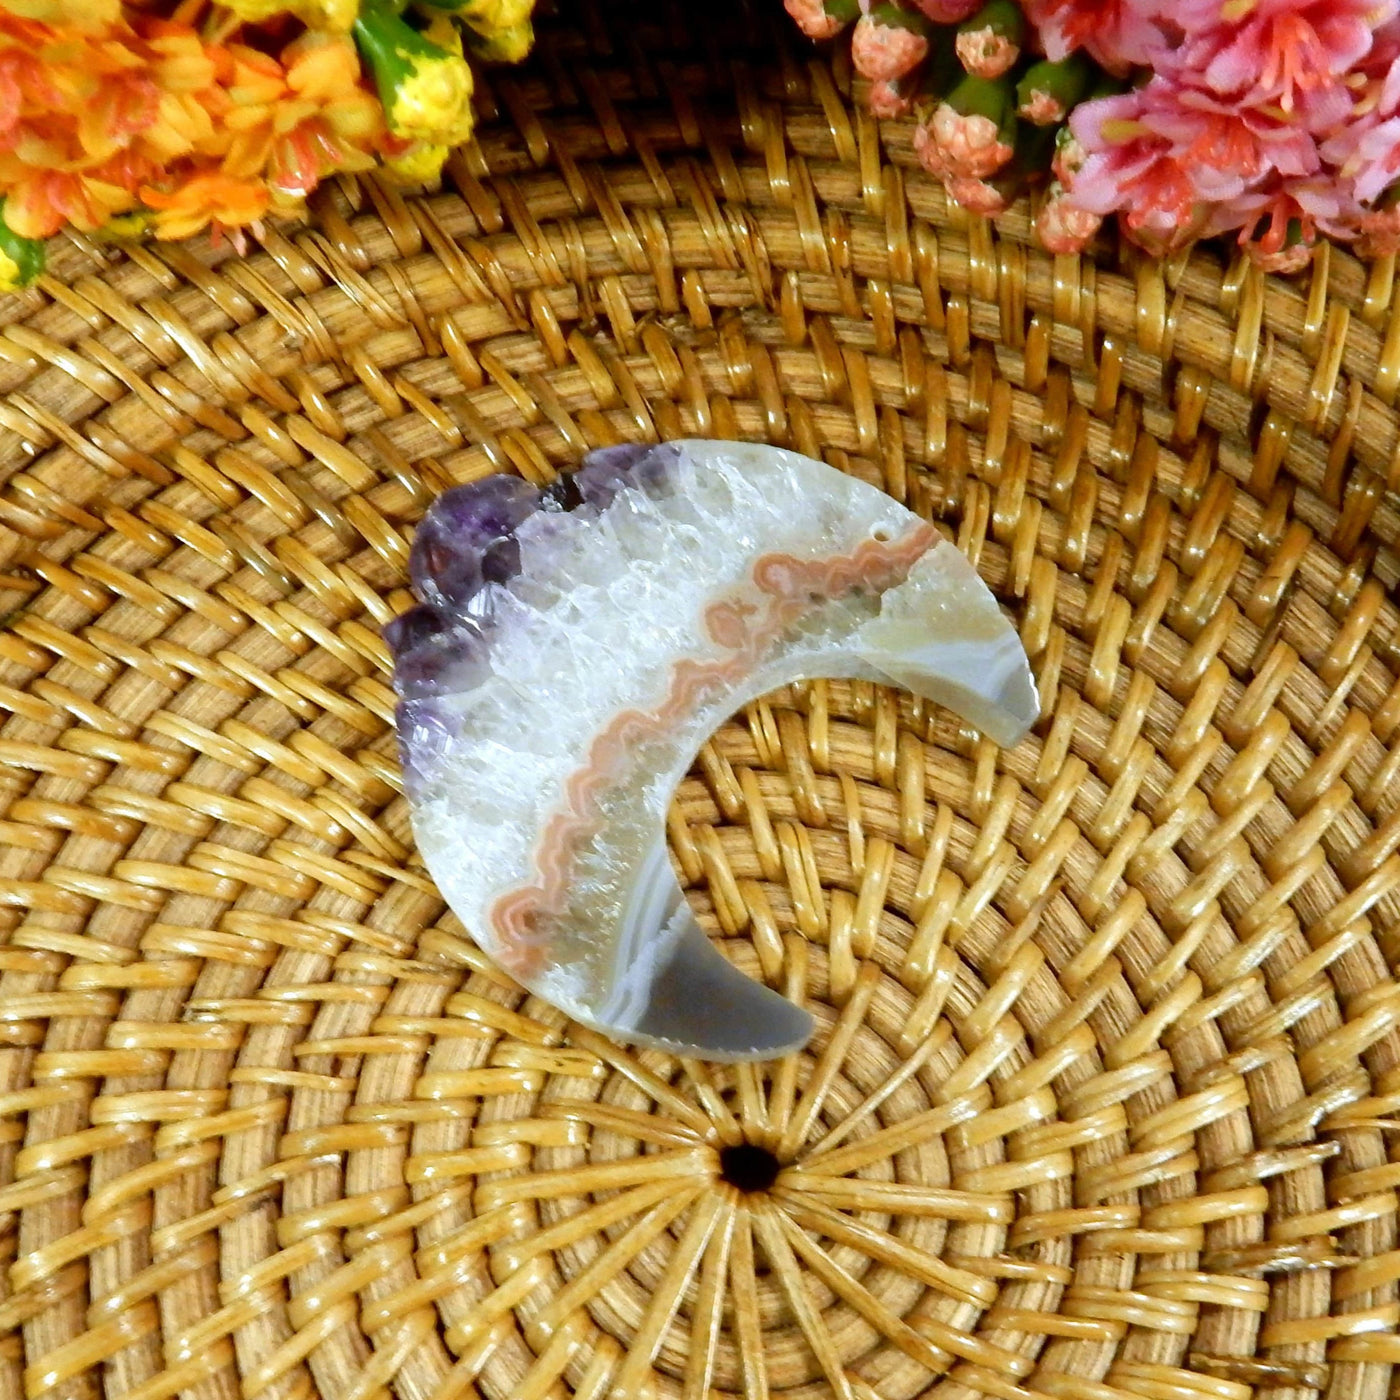 large drilled amethyst half moon with decorations in the background